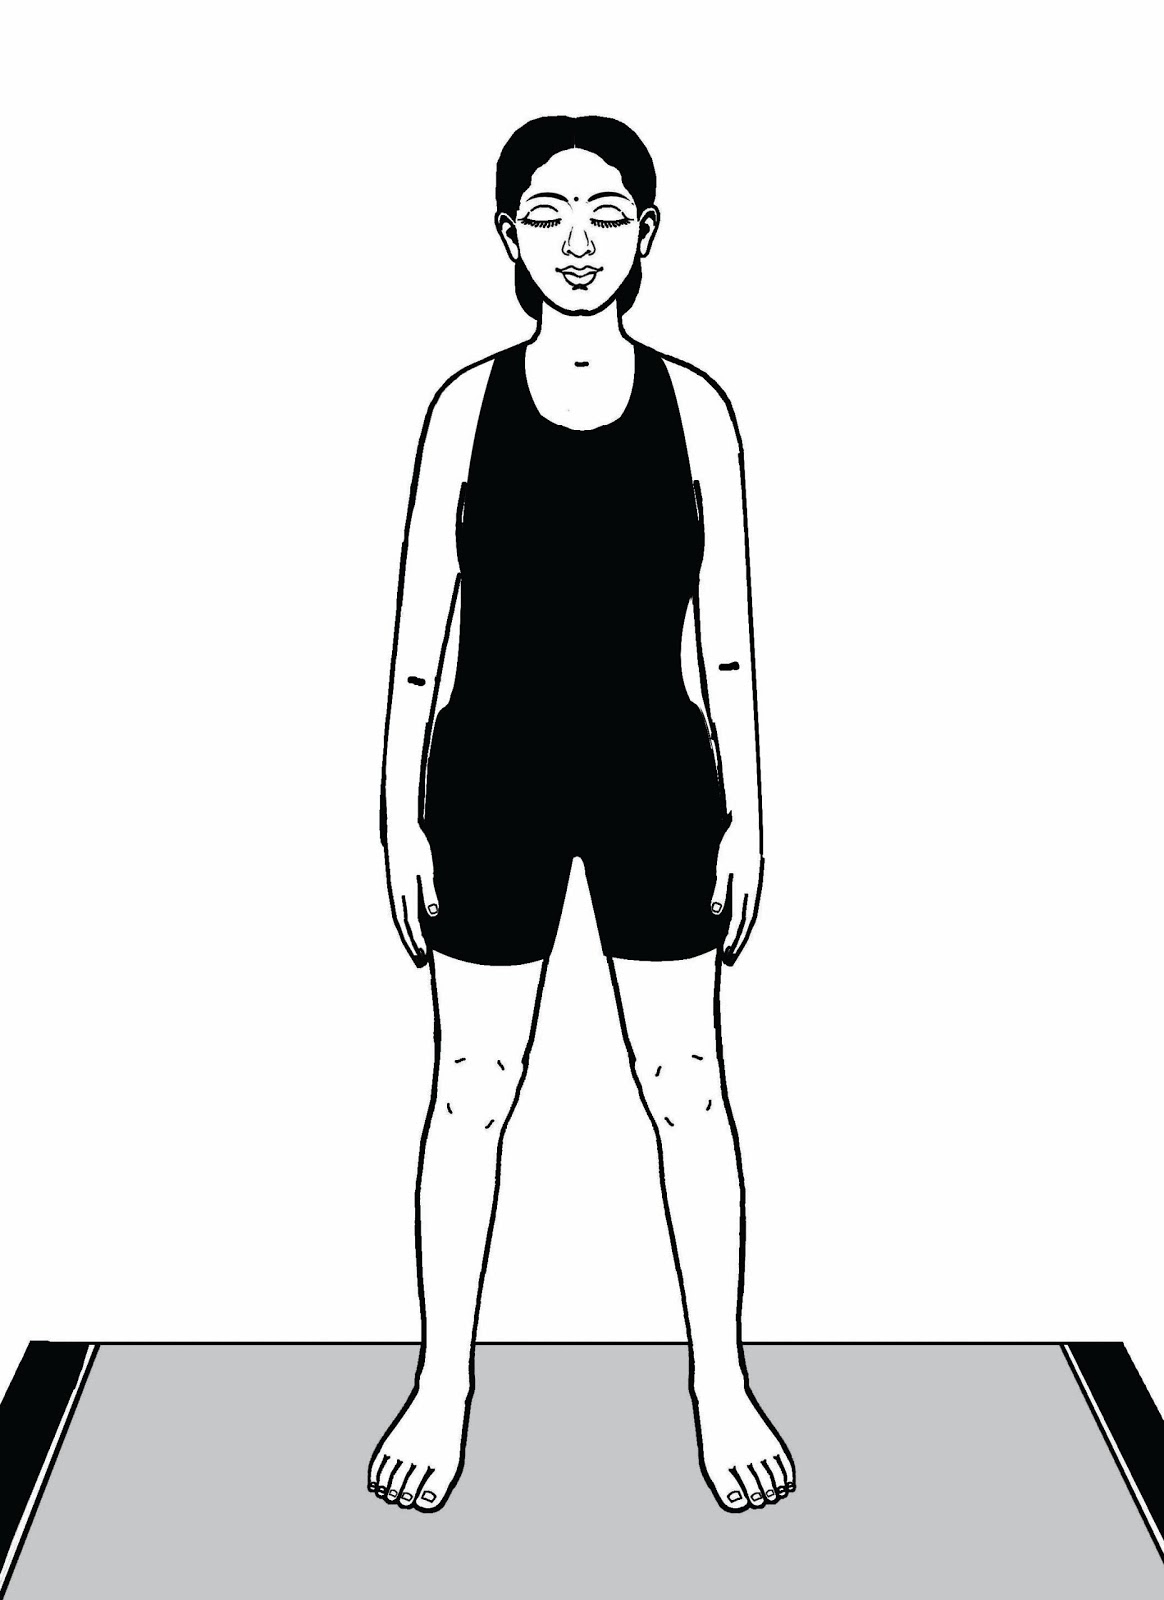 Tadasana: Over 324 Royalty-Free Licensable Stock Illustrations & Drawings |  Shutterstock